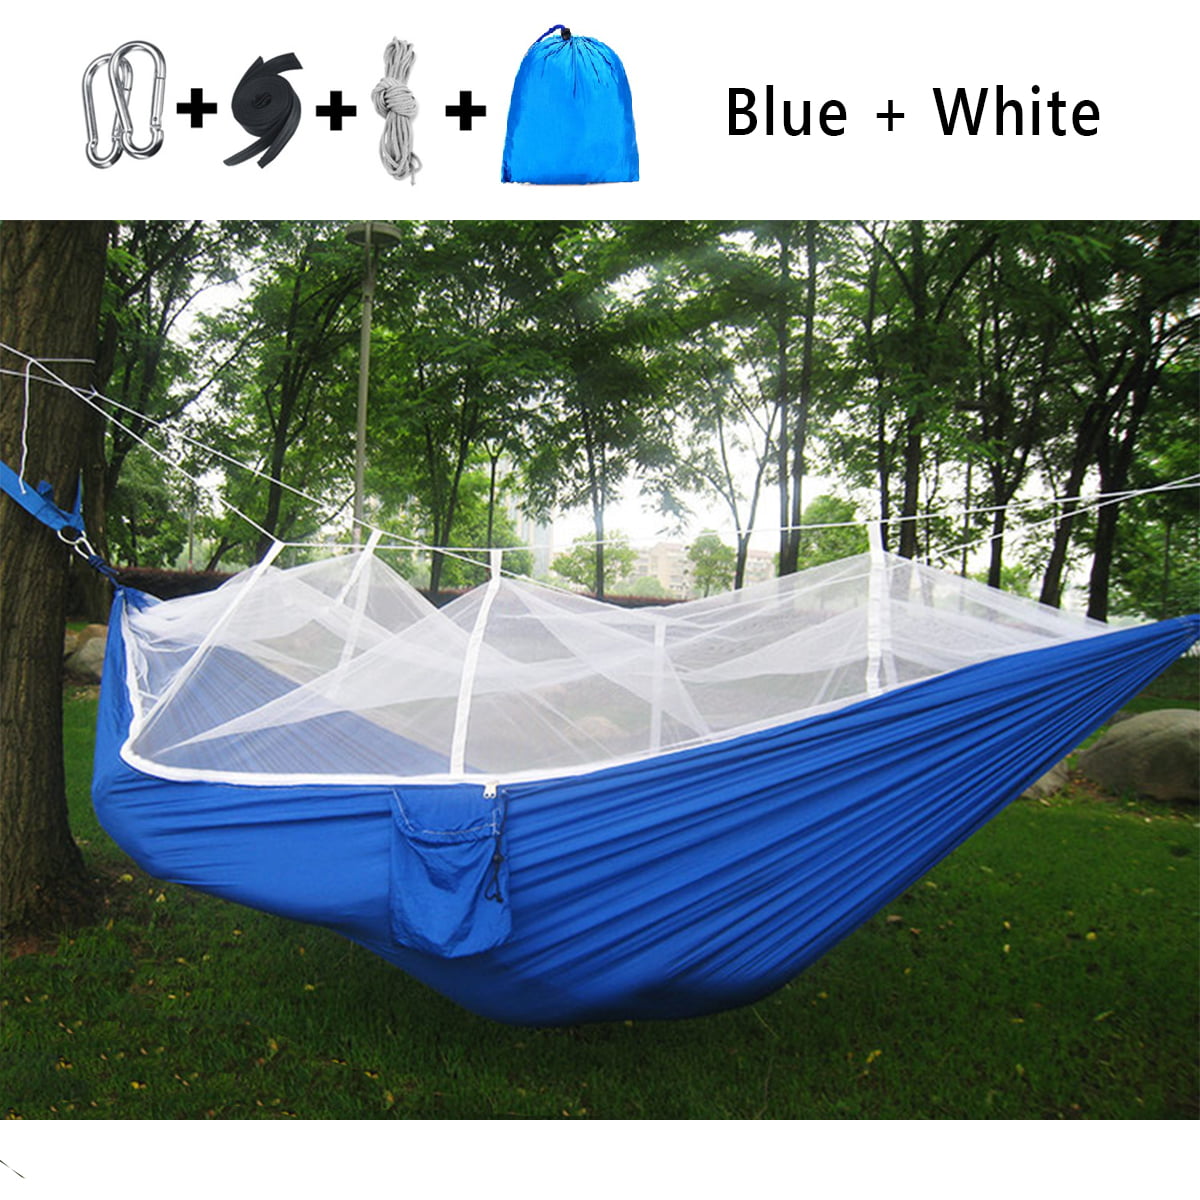 Portable Two Person Nylon Rope Hanging Hammock Swing Fabric Camping Outdoor Bed 